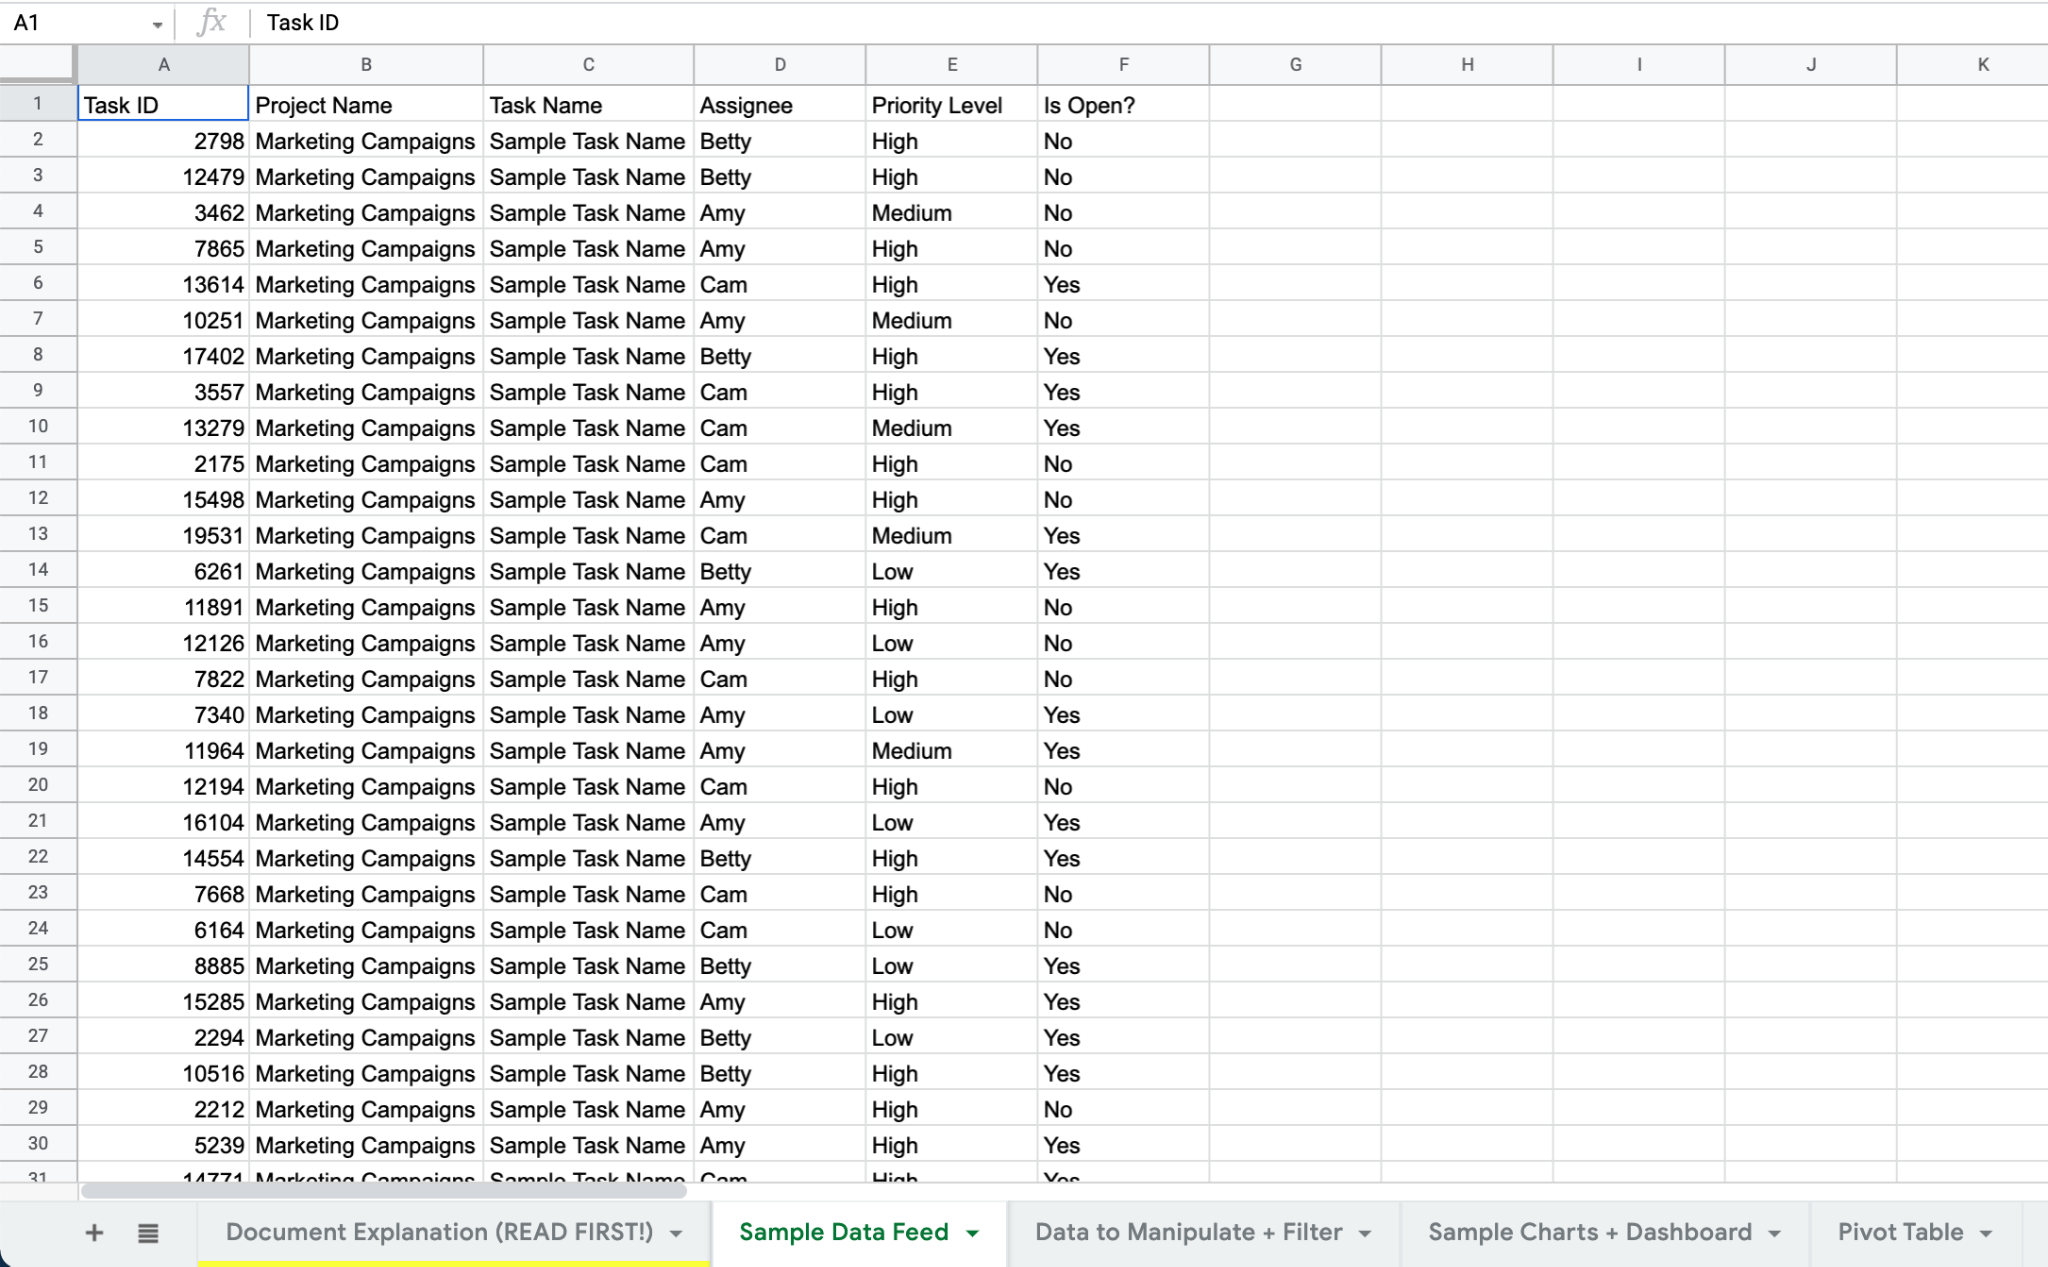 Velocity Data Link Displayed in Google Sheets